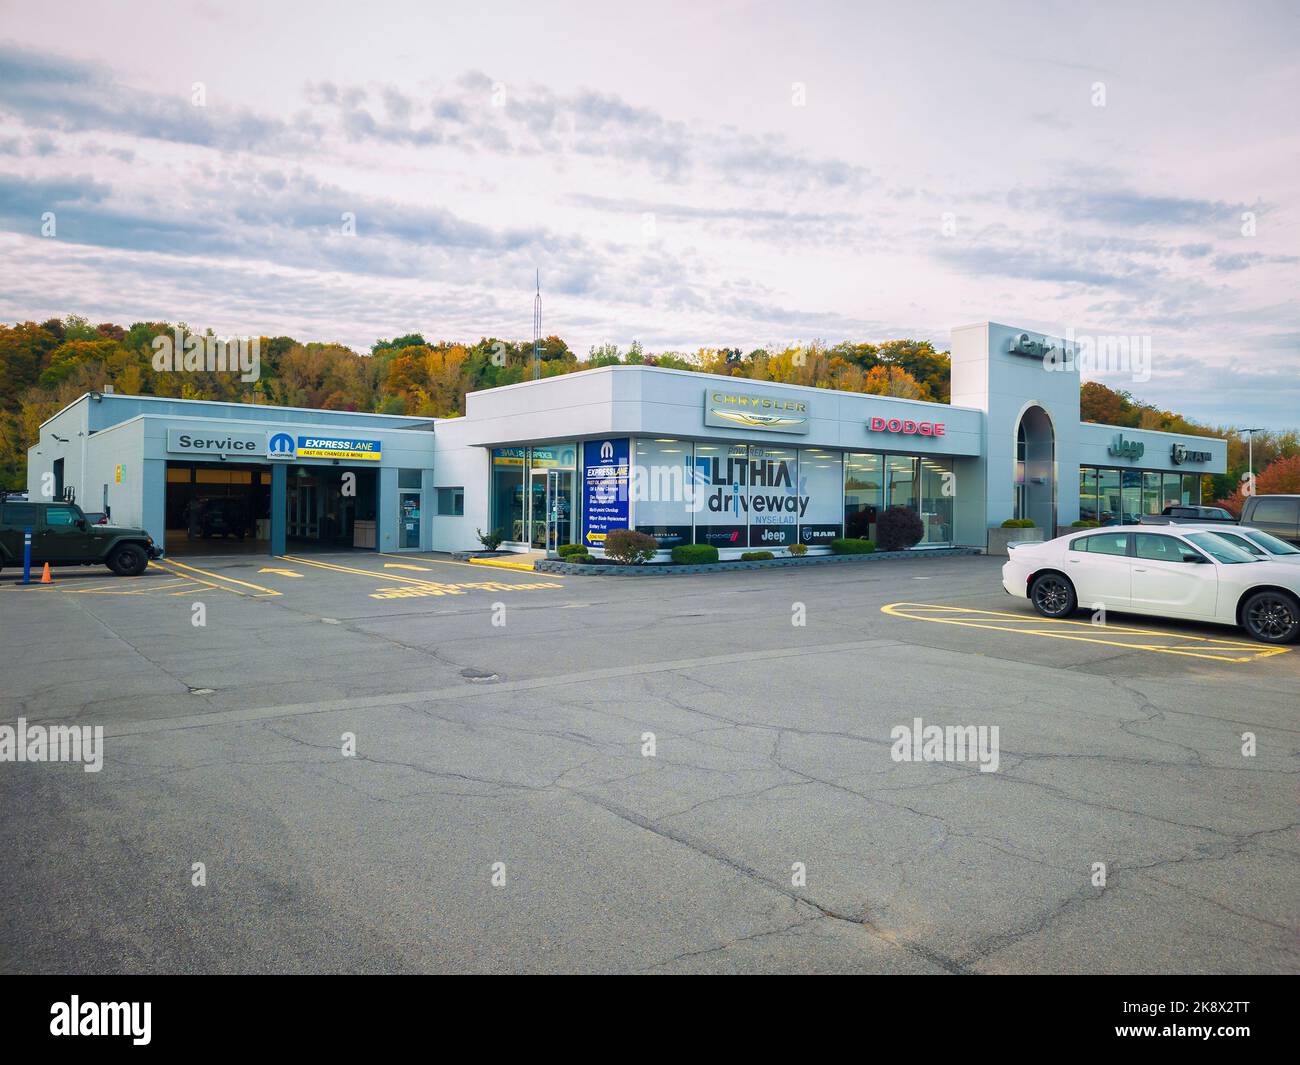 New Hartford, New York - Oct 6, 2022: Landscape Wide View of Carbone Chrysler Motor Company Dealership Building Exterior Stock Photo